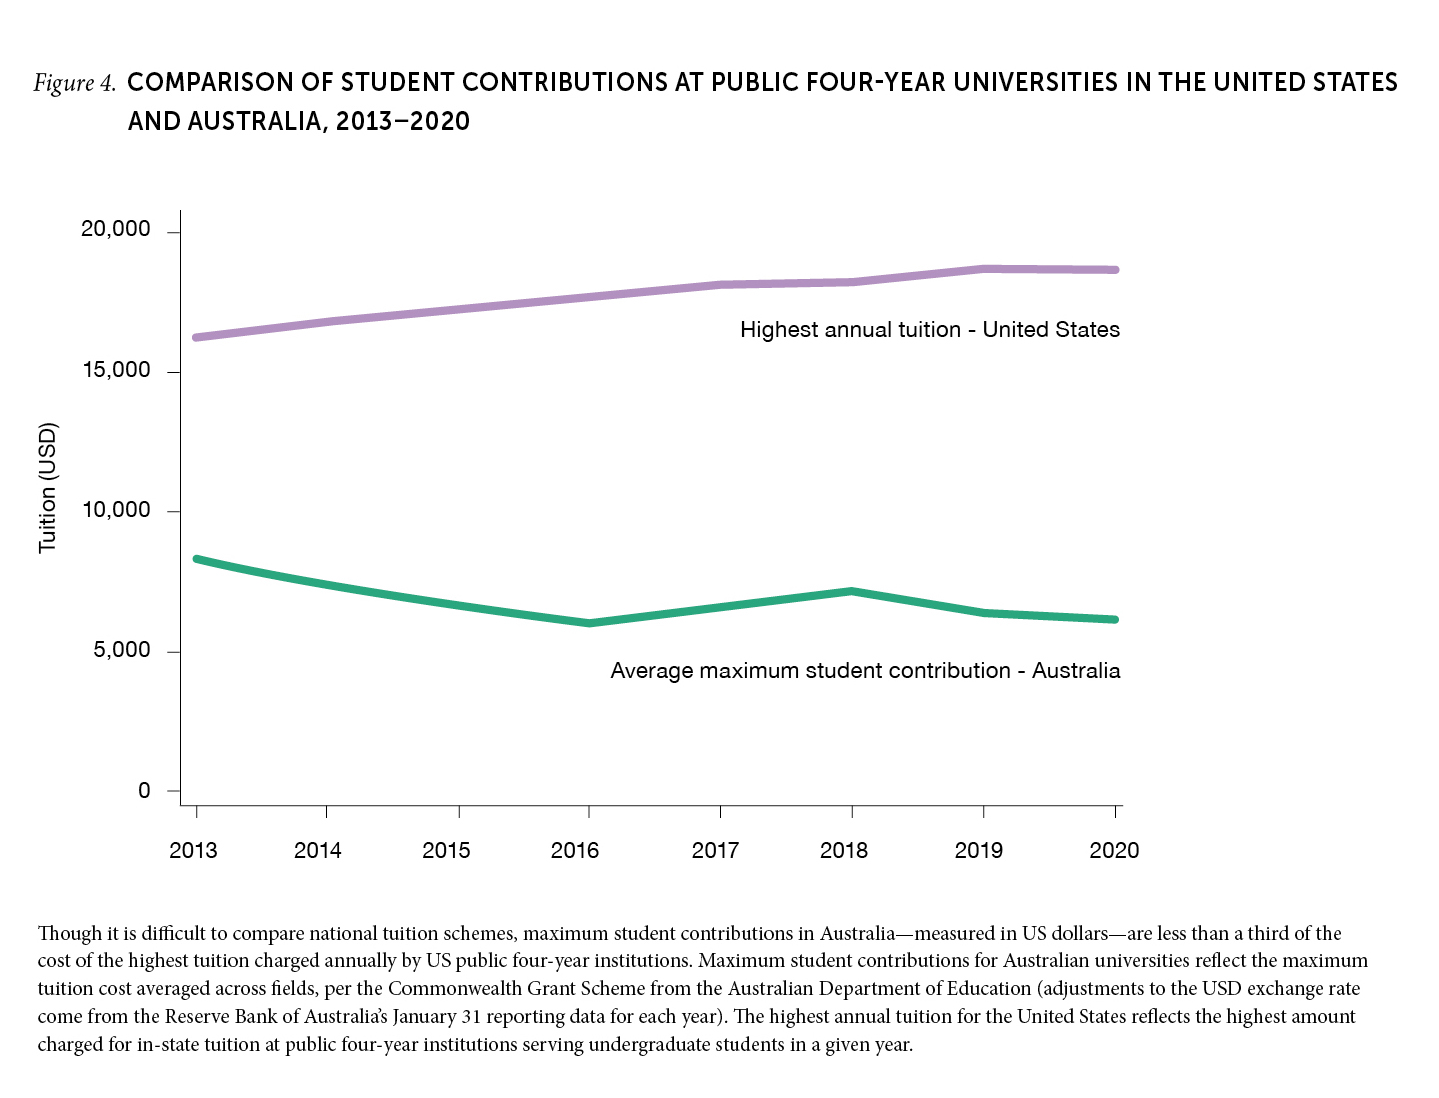 Figure 4. Comparison of student contributions at public four-year universities in the United States and Australia, 2013–2020